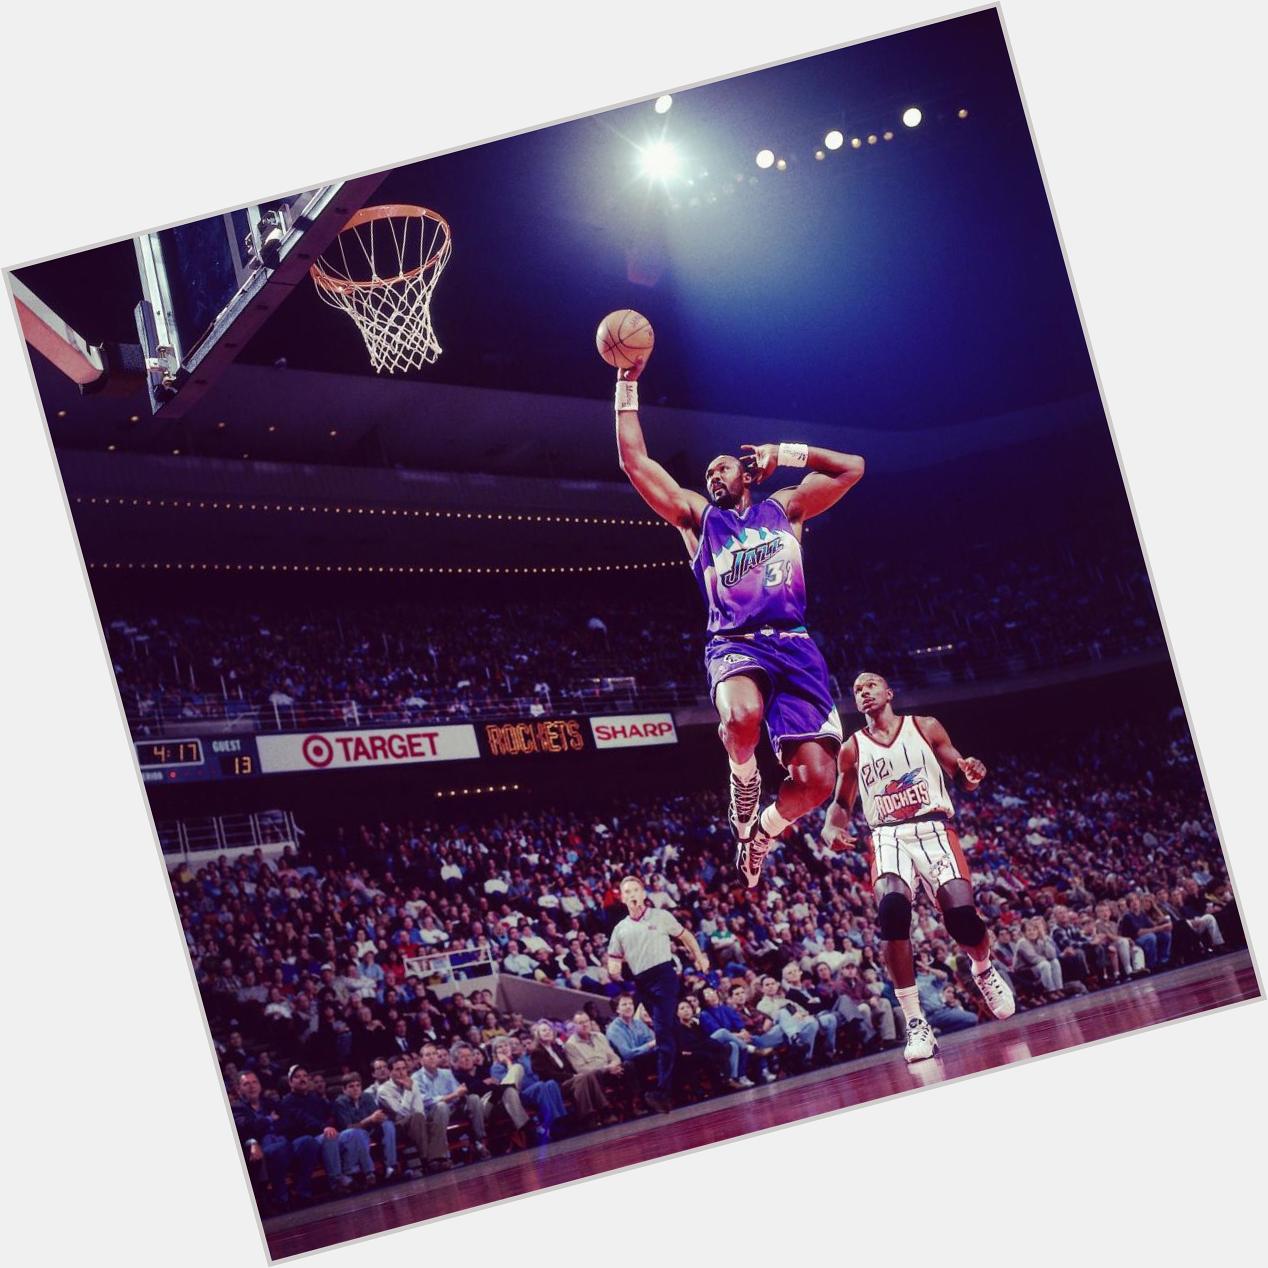 Happy 52nd birthday to \"The Mailman\", Karl Malone. He currently has the 2nd most points scored in NBA history. 